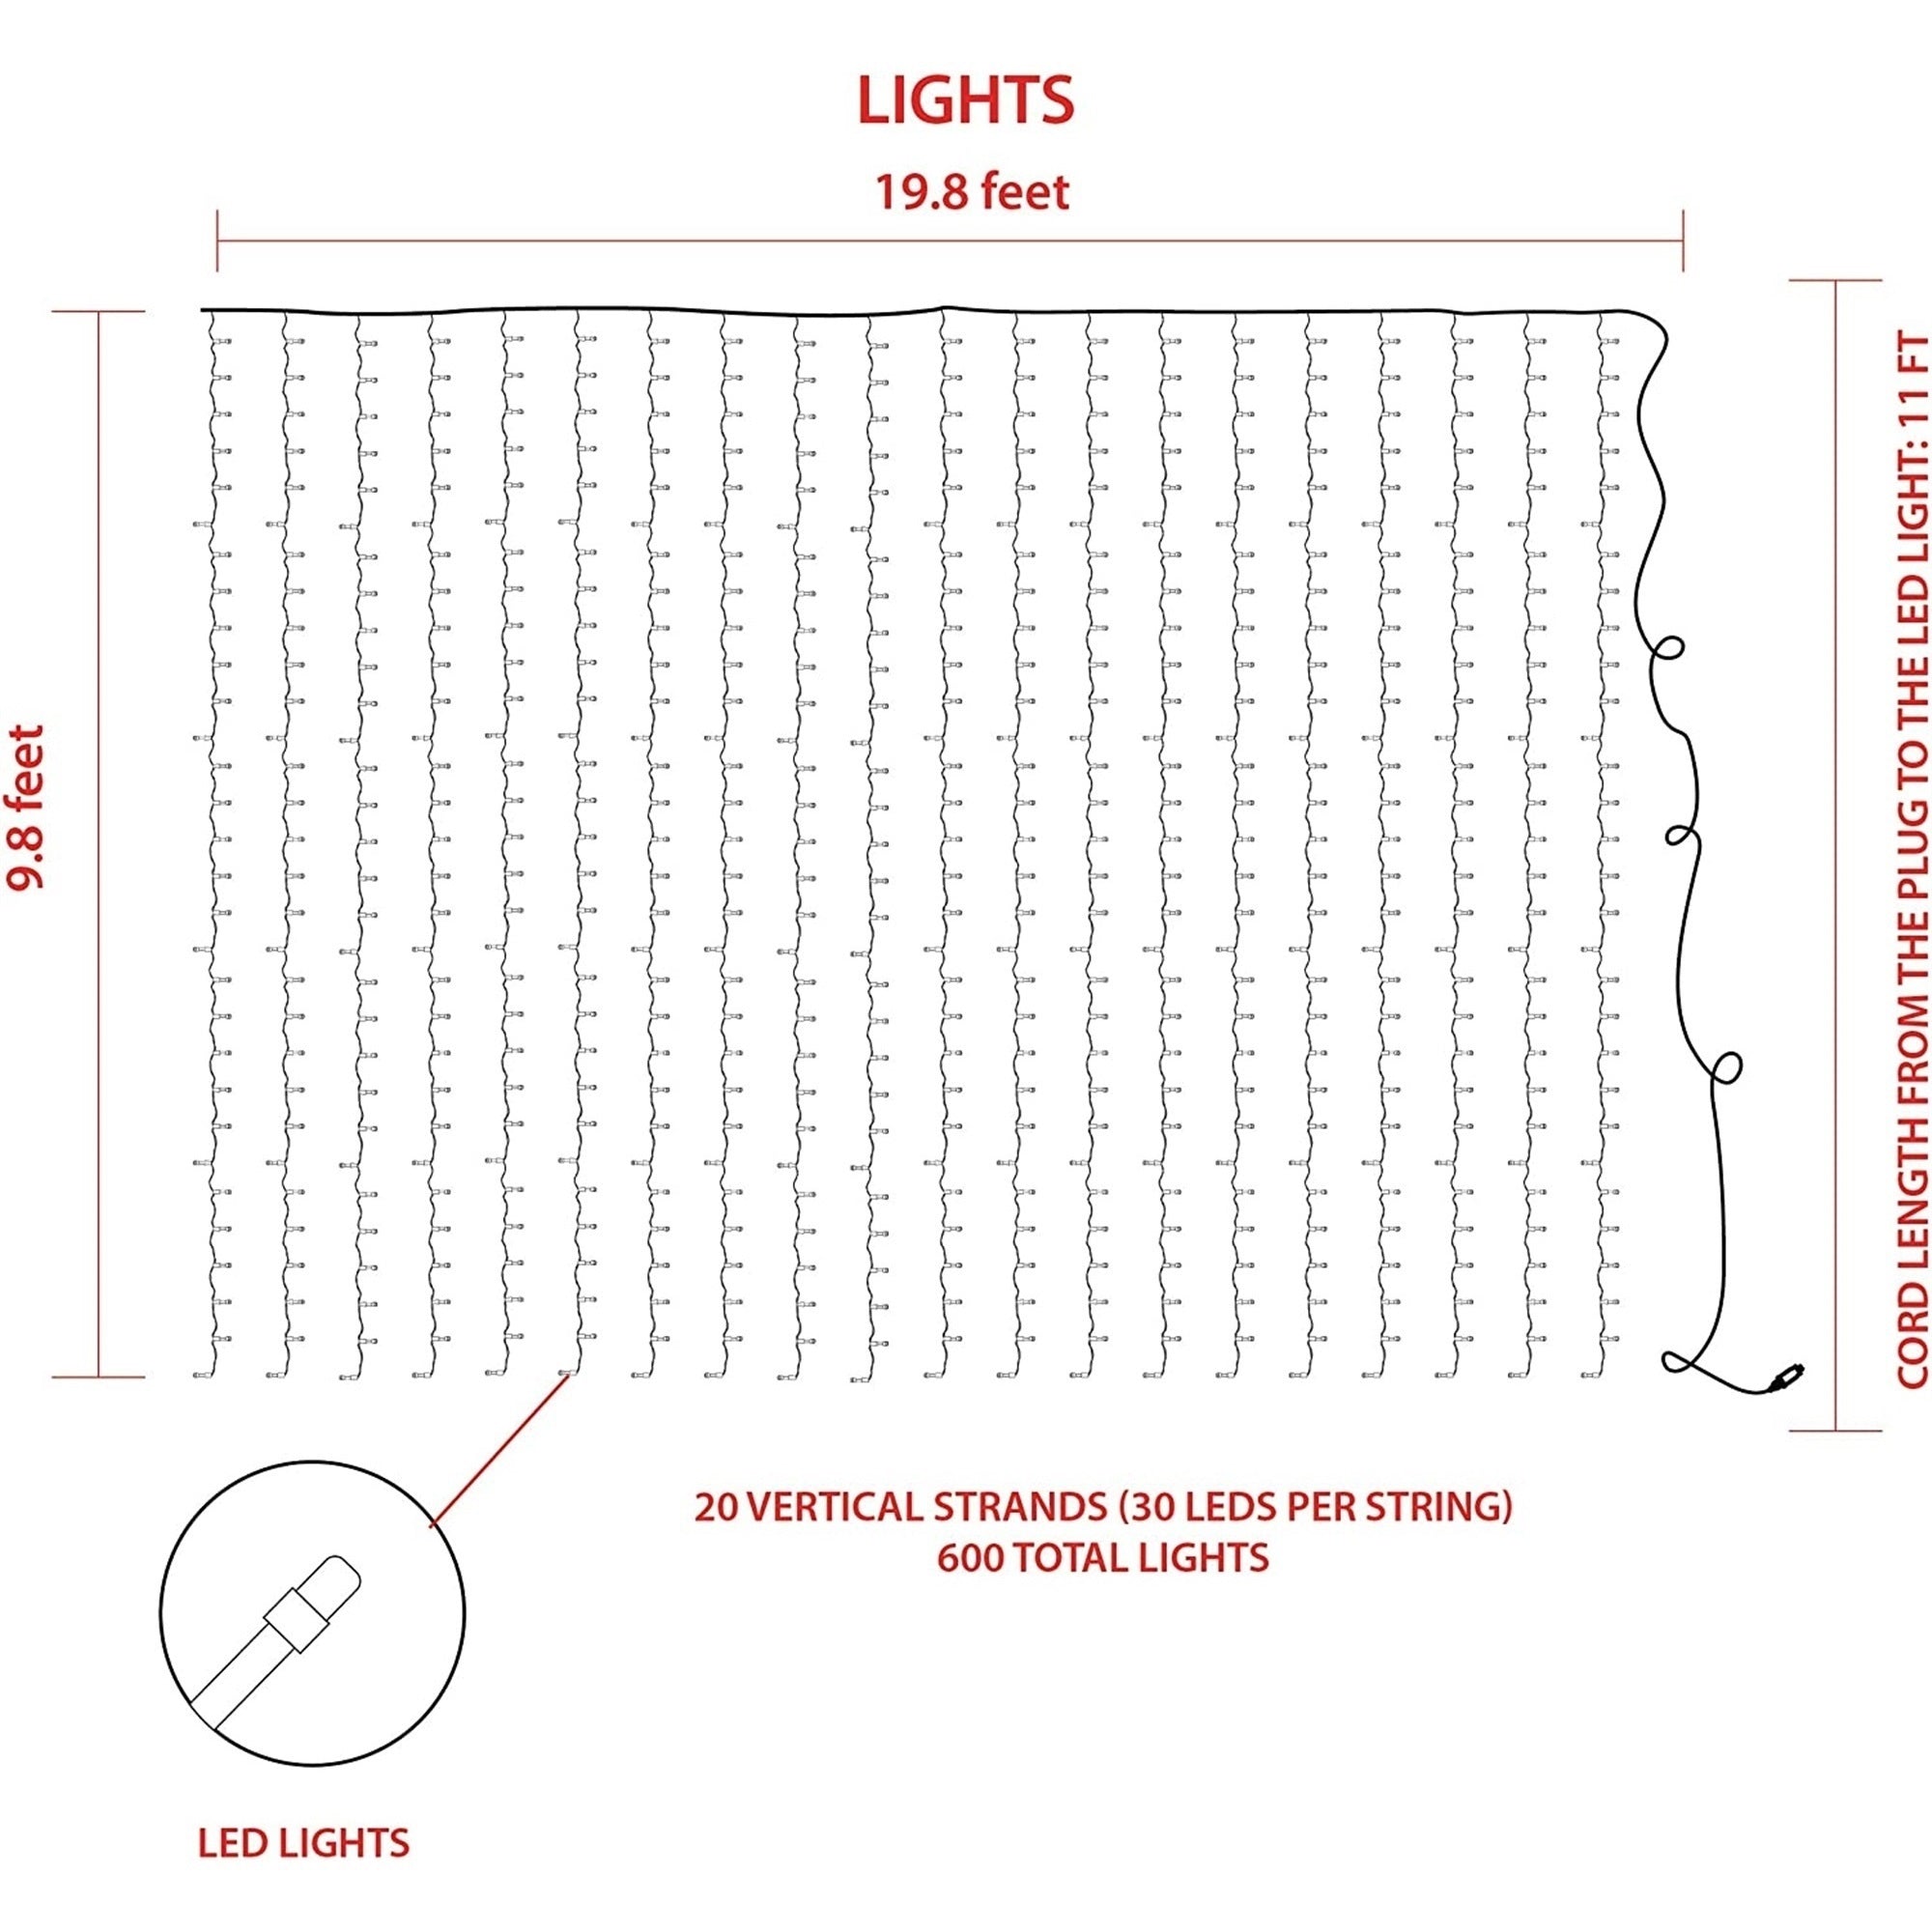 ProductWorks 8-Function, String Light Curtain, 600 Warm White Micro Bulbs, 20'